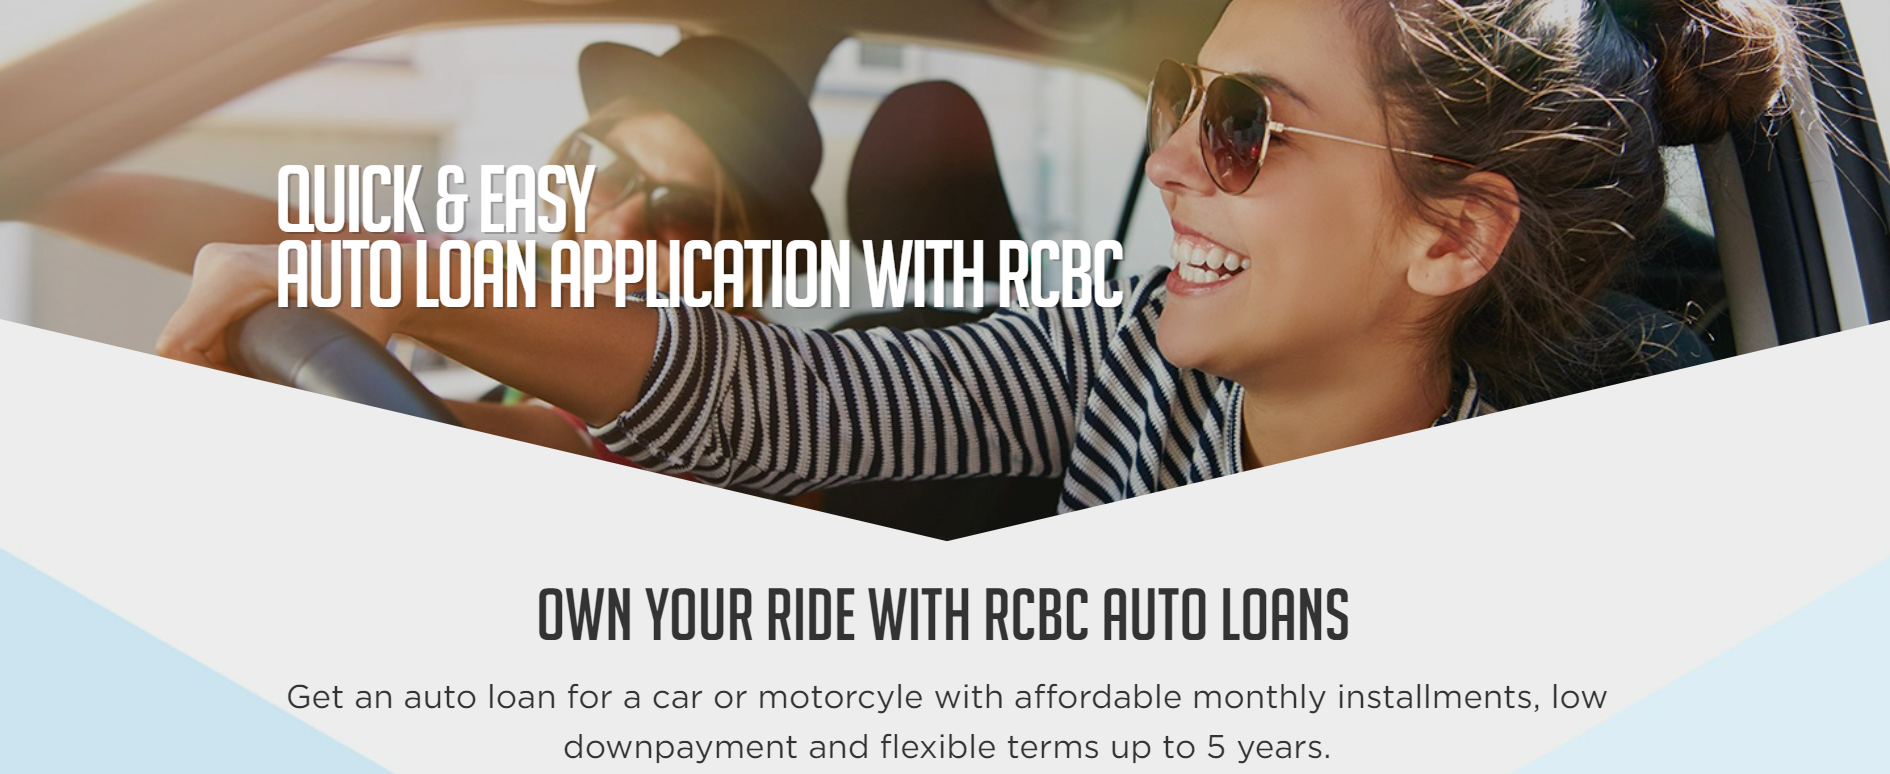 best bank for car loan in the philippines - RCBC